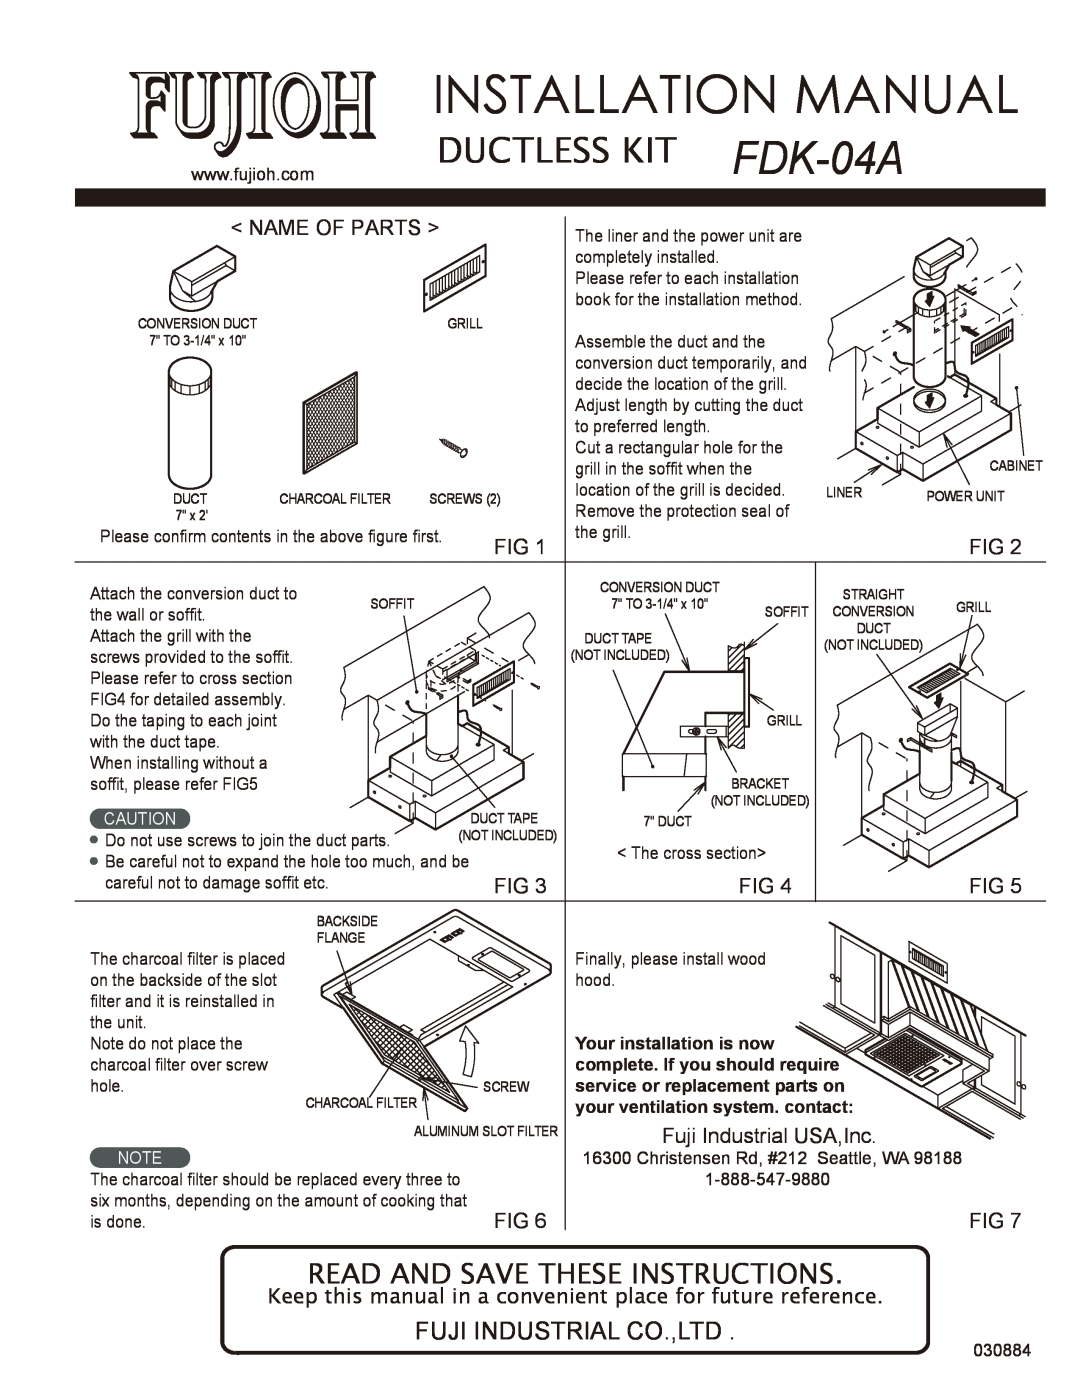 Fujioh FDK-04A installation manual Installation Manual, Ductless Kit, Read And Save These Instructions, Name Of Parts 